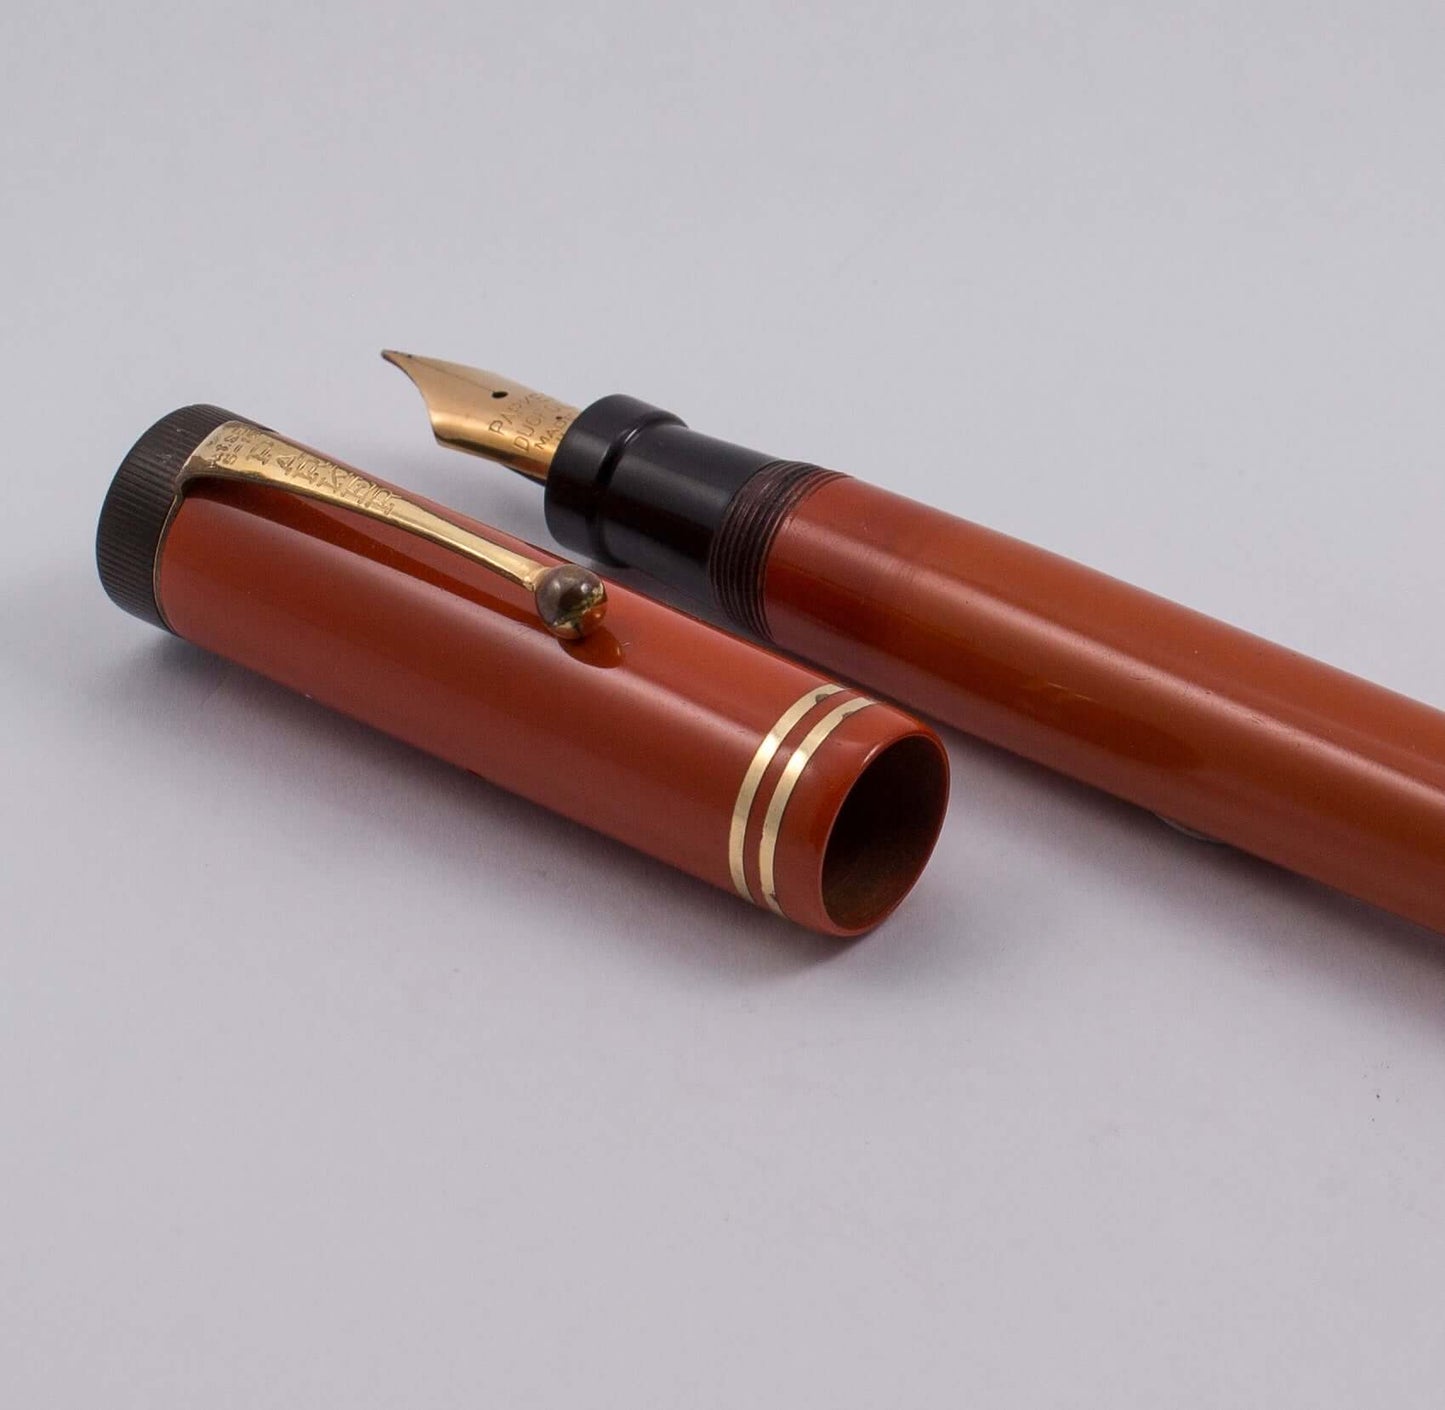 Fully restored, Parker Senior Duofold Fountain Pen, Two cap Bands, Button Filler Type: Restored Vintage Senior Duofold Fountain Pen Product Name: Parker Senior Duofold Manufacture Year: Late 1920's Length: 5 1/2 Filling System: Button Filler, Restored wit